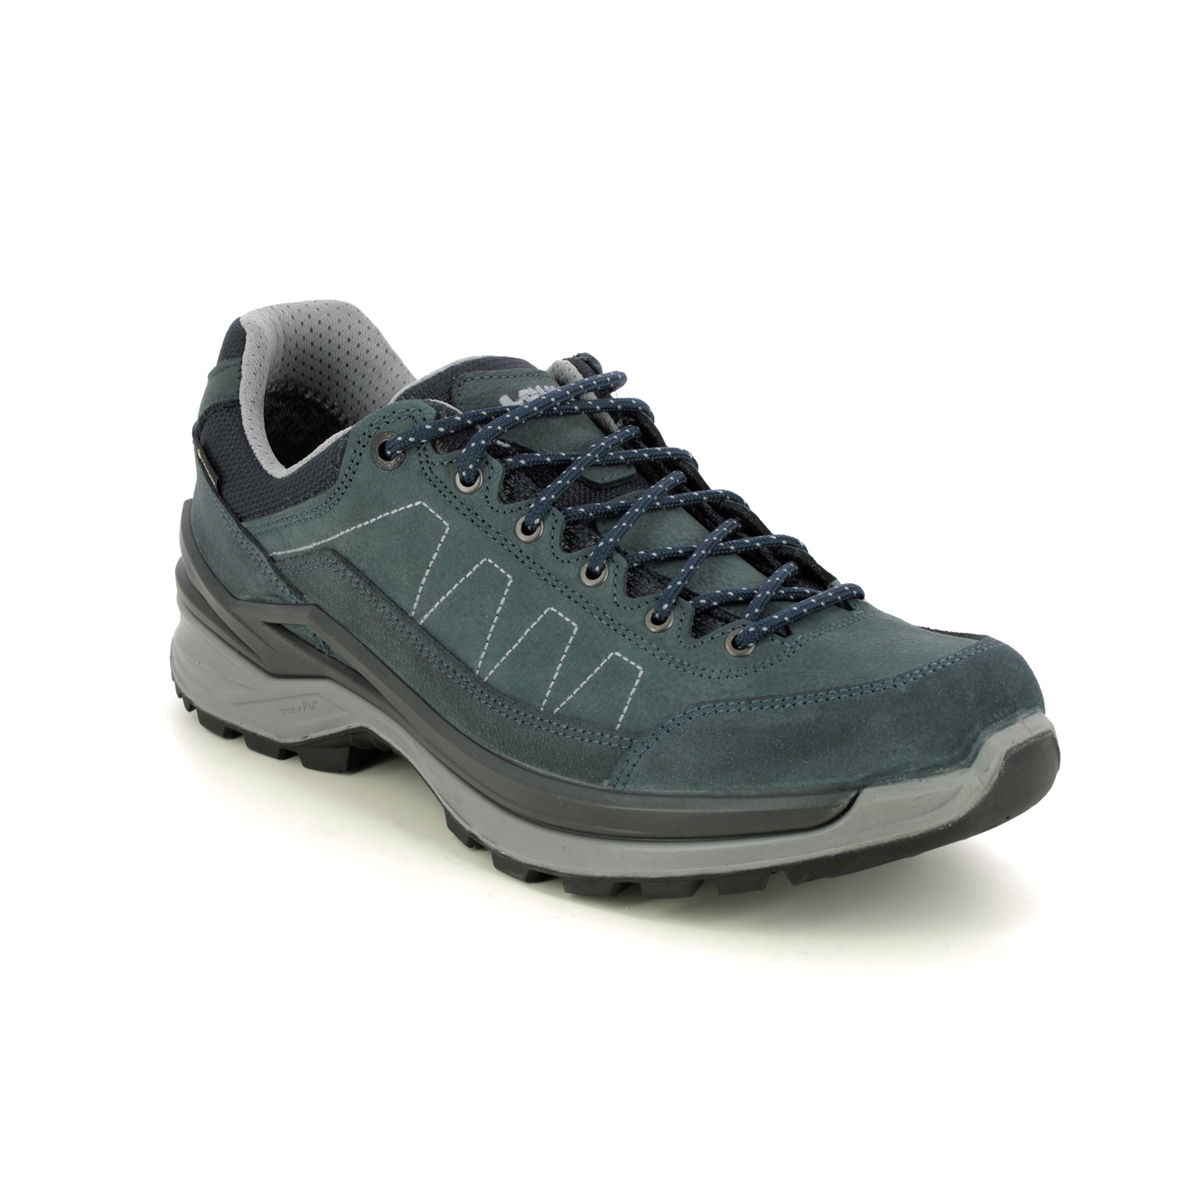 Lowa Toro Pro Gtx Lo Mens Walking Shoes In Navy Leather 310931-6130 In Regular Fit Mens Uk Size 9 In Plain Navy Leather